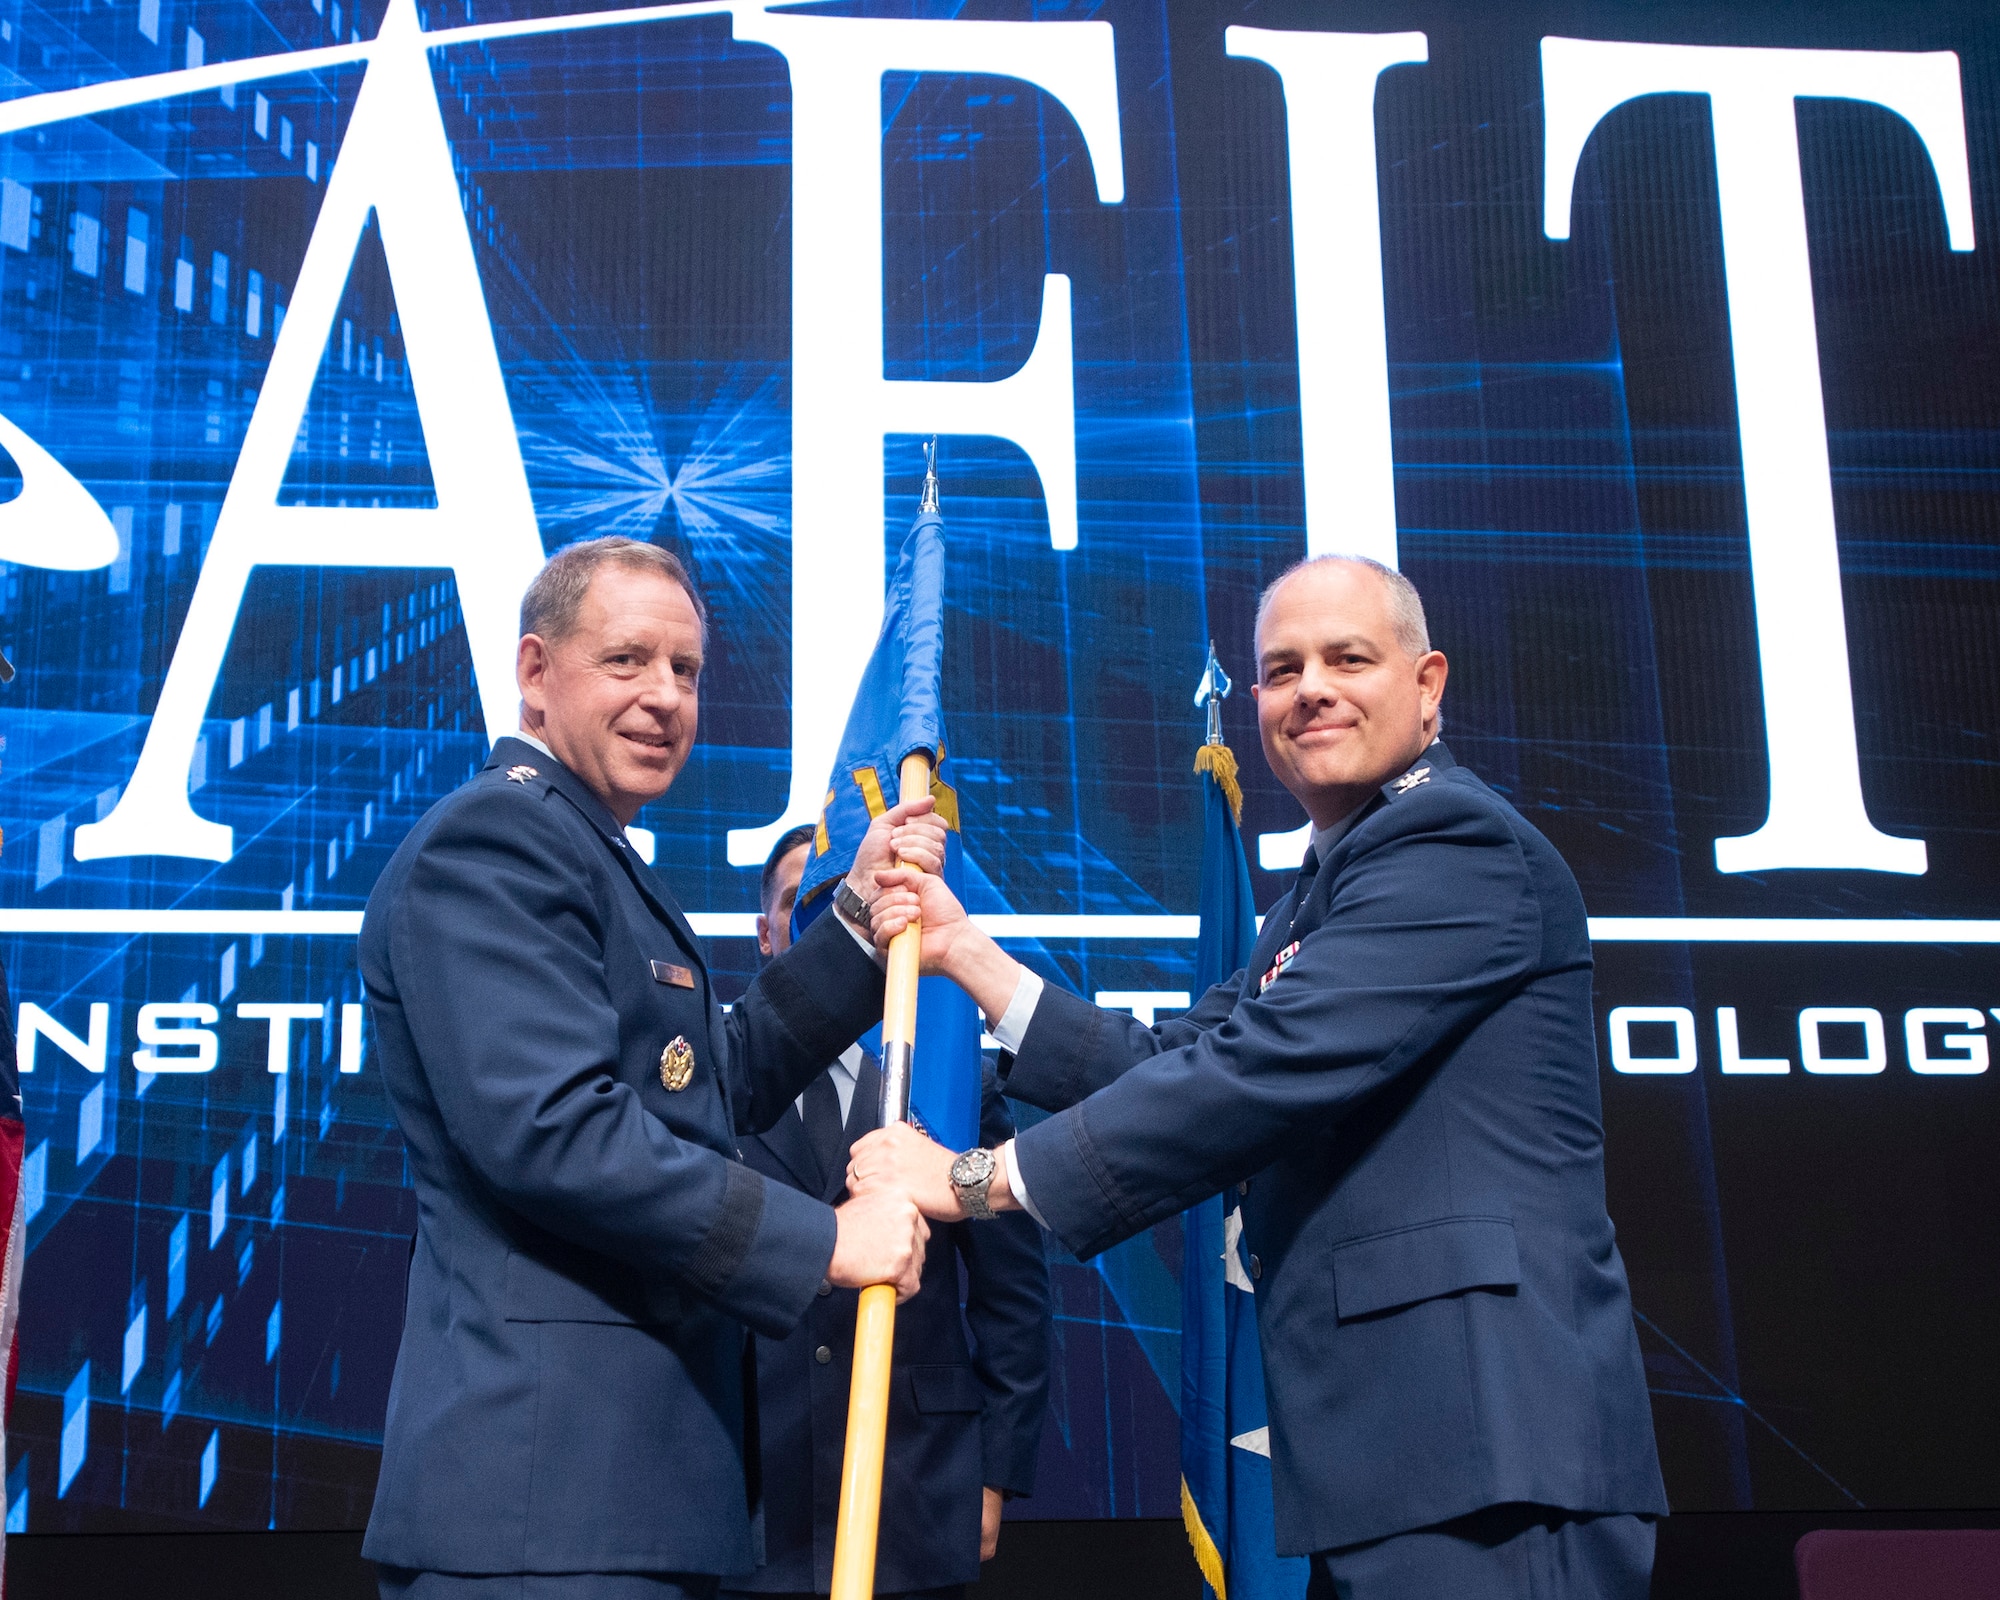 Lt. Gen. James Hecker (left), Air University commander and president, presents the Air University Detachment 1 (Air Force Institute of Technology) guidon to Col. Paul Harmer during a change-of-command ceremony July28 at the AFIT campus on Wright-Patterson Air Force Base. Harmer assumes command from Col. Paul Cotellesso, who retired after 30 years of military service. (U.S. Air Force photo by R.J. Oriez)